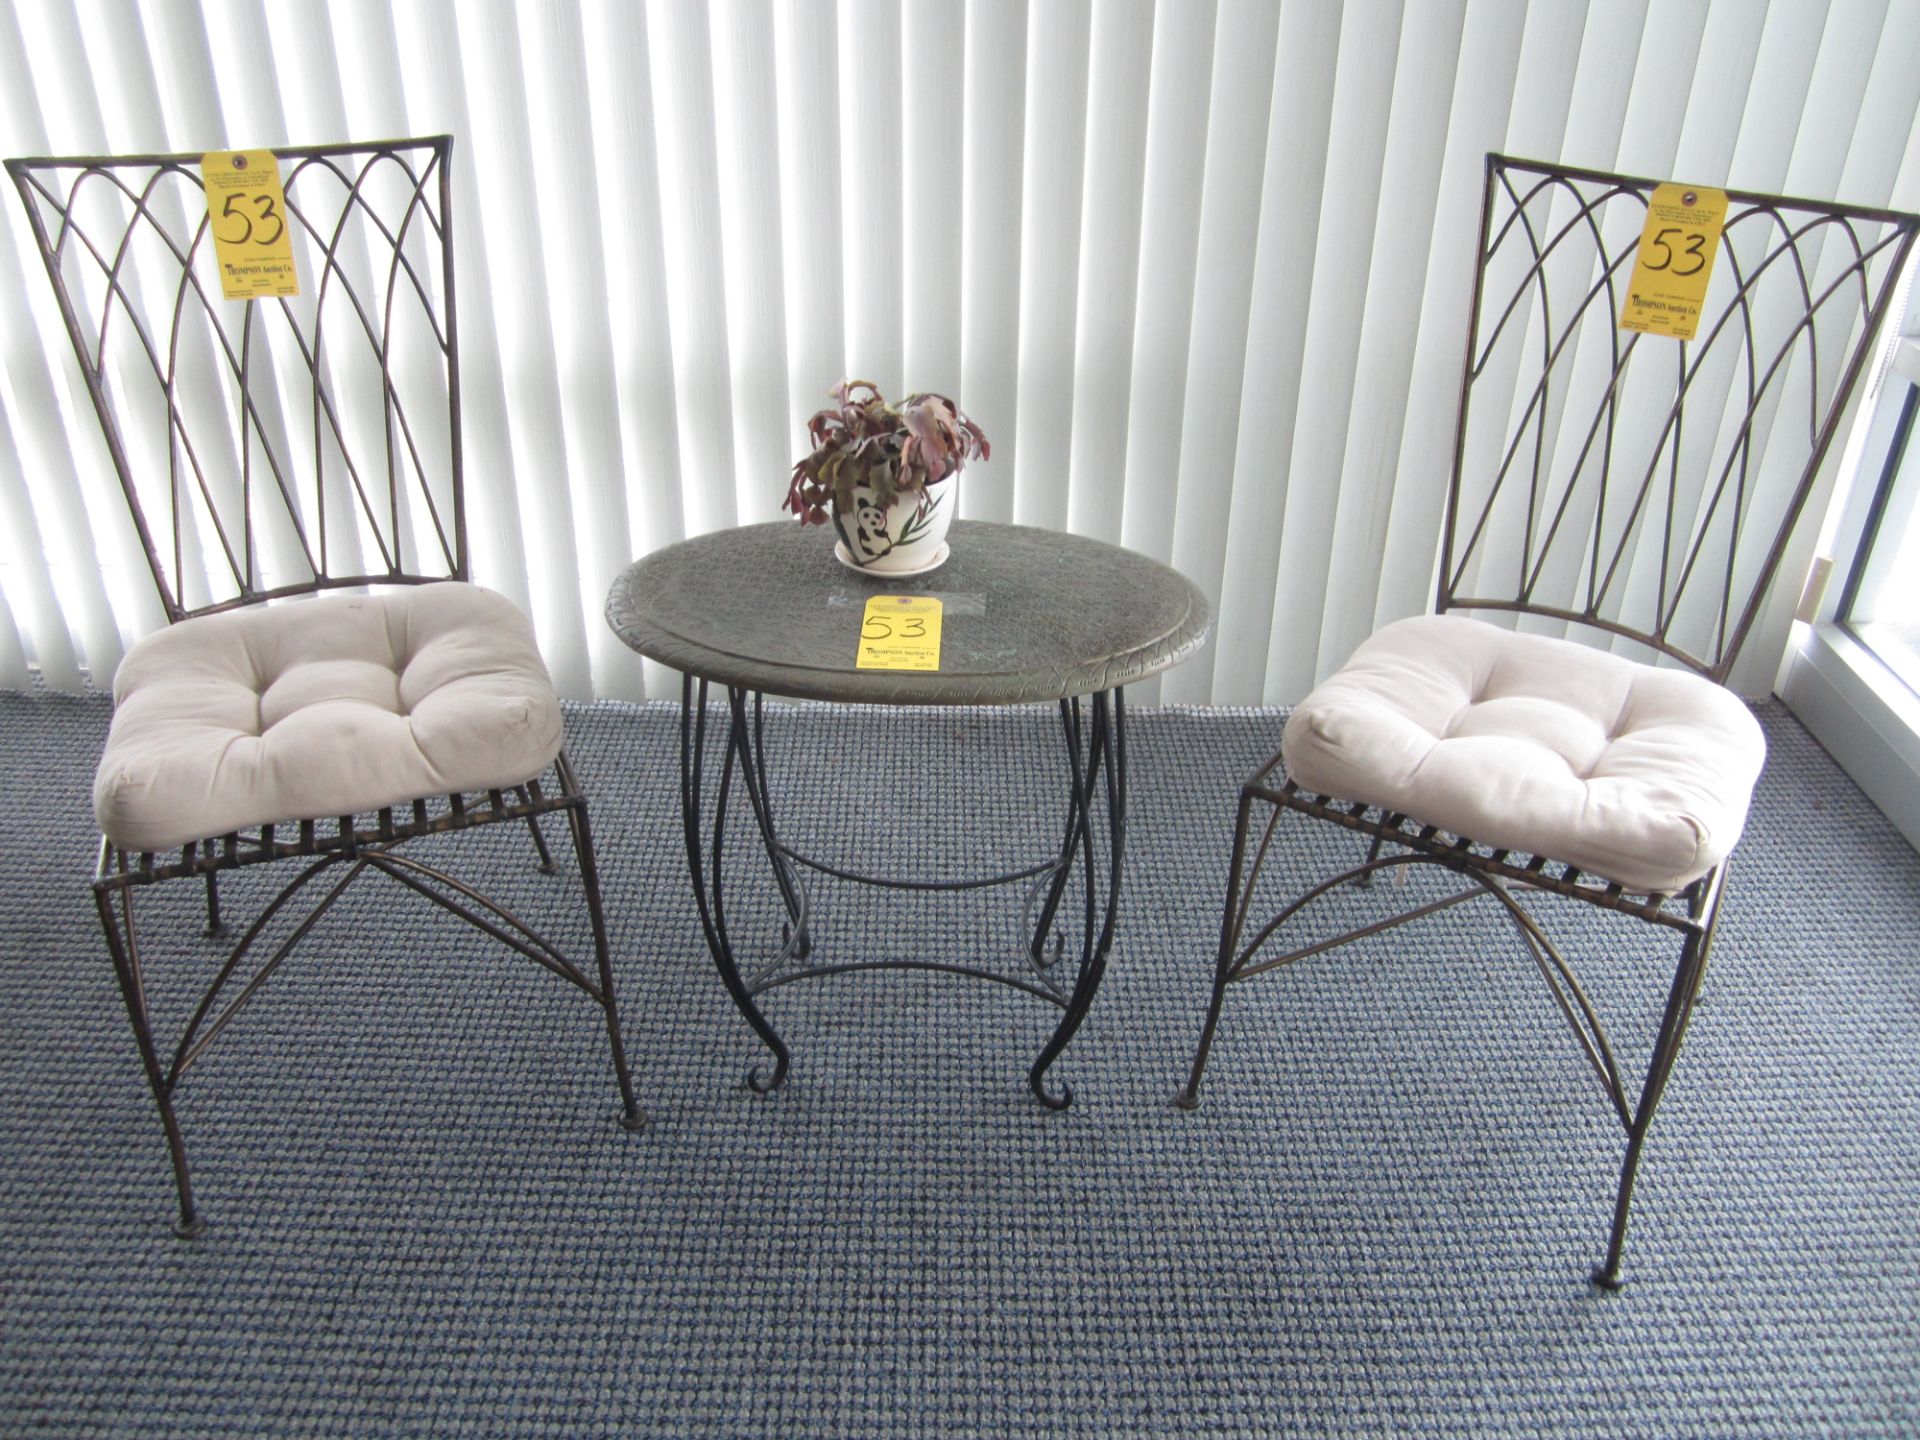 Wrought Iron Table with (2) Wrought Iron Chairs and Cushions